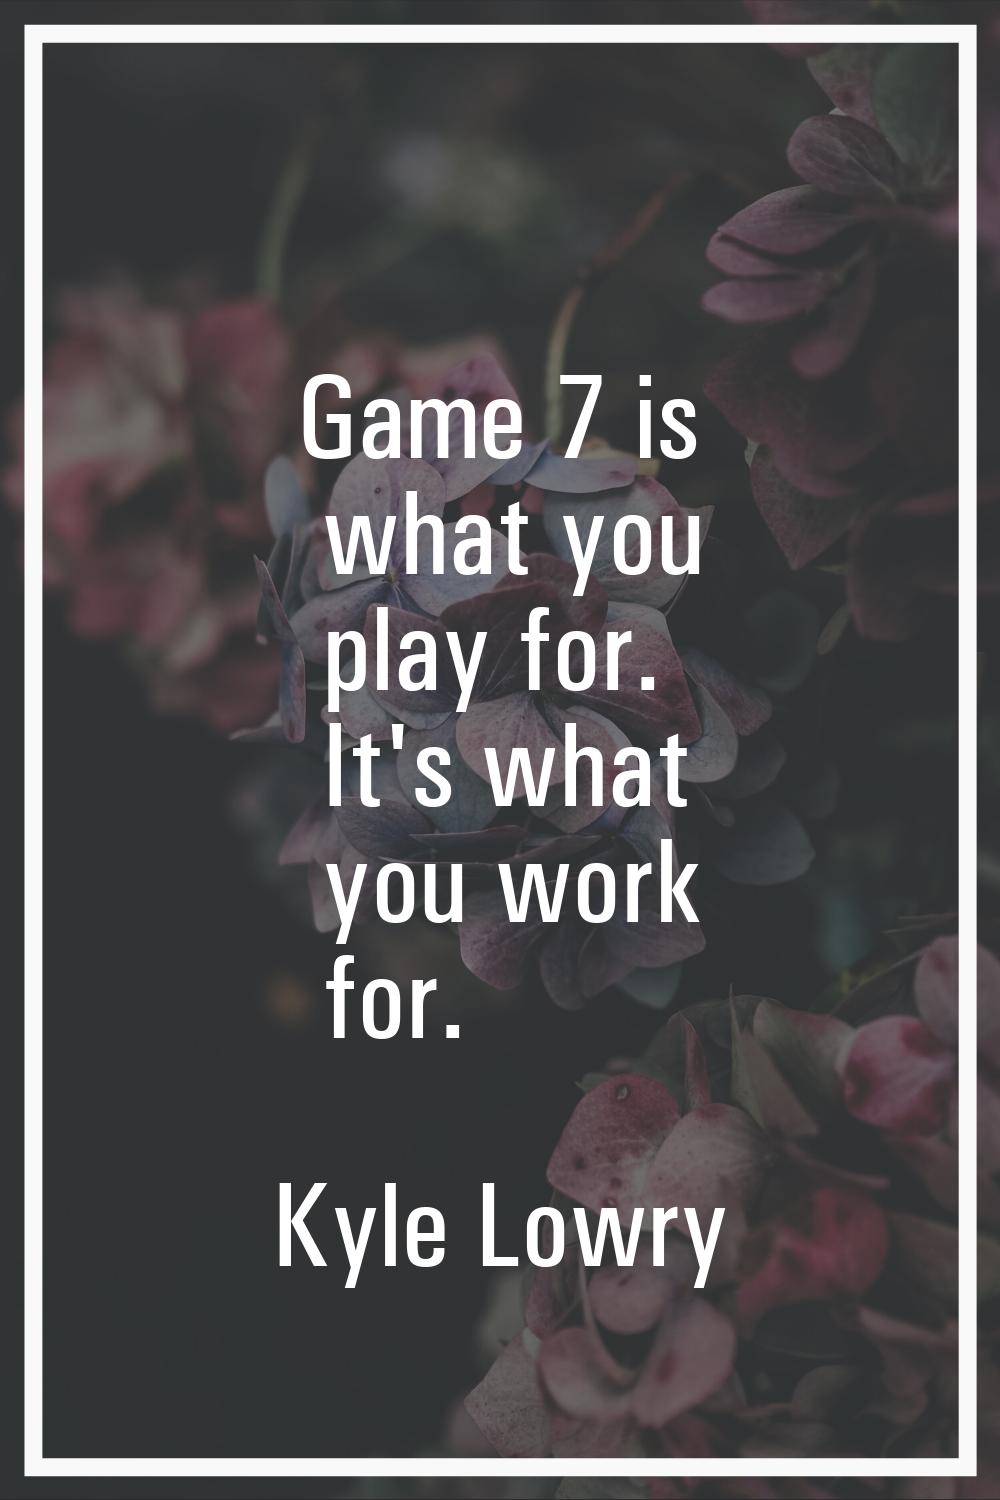 Game 7 is what you play for. It's what you work for.